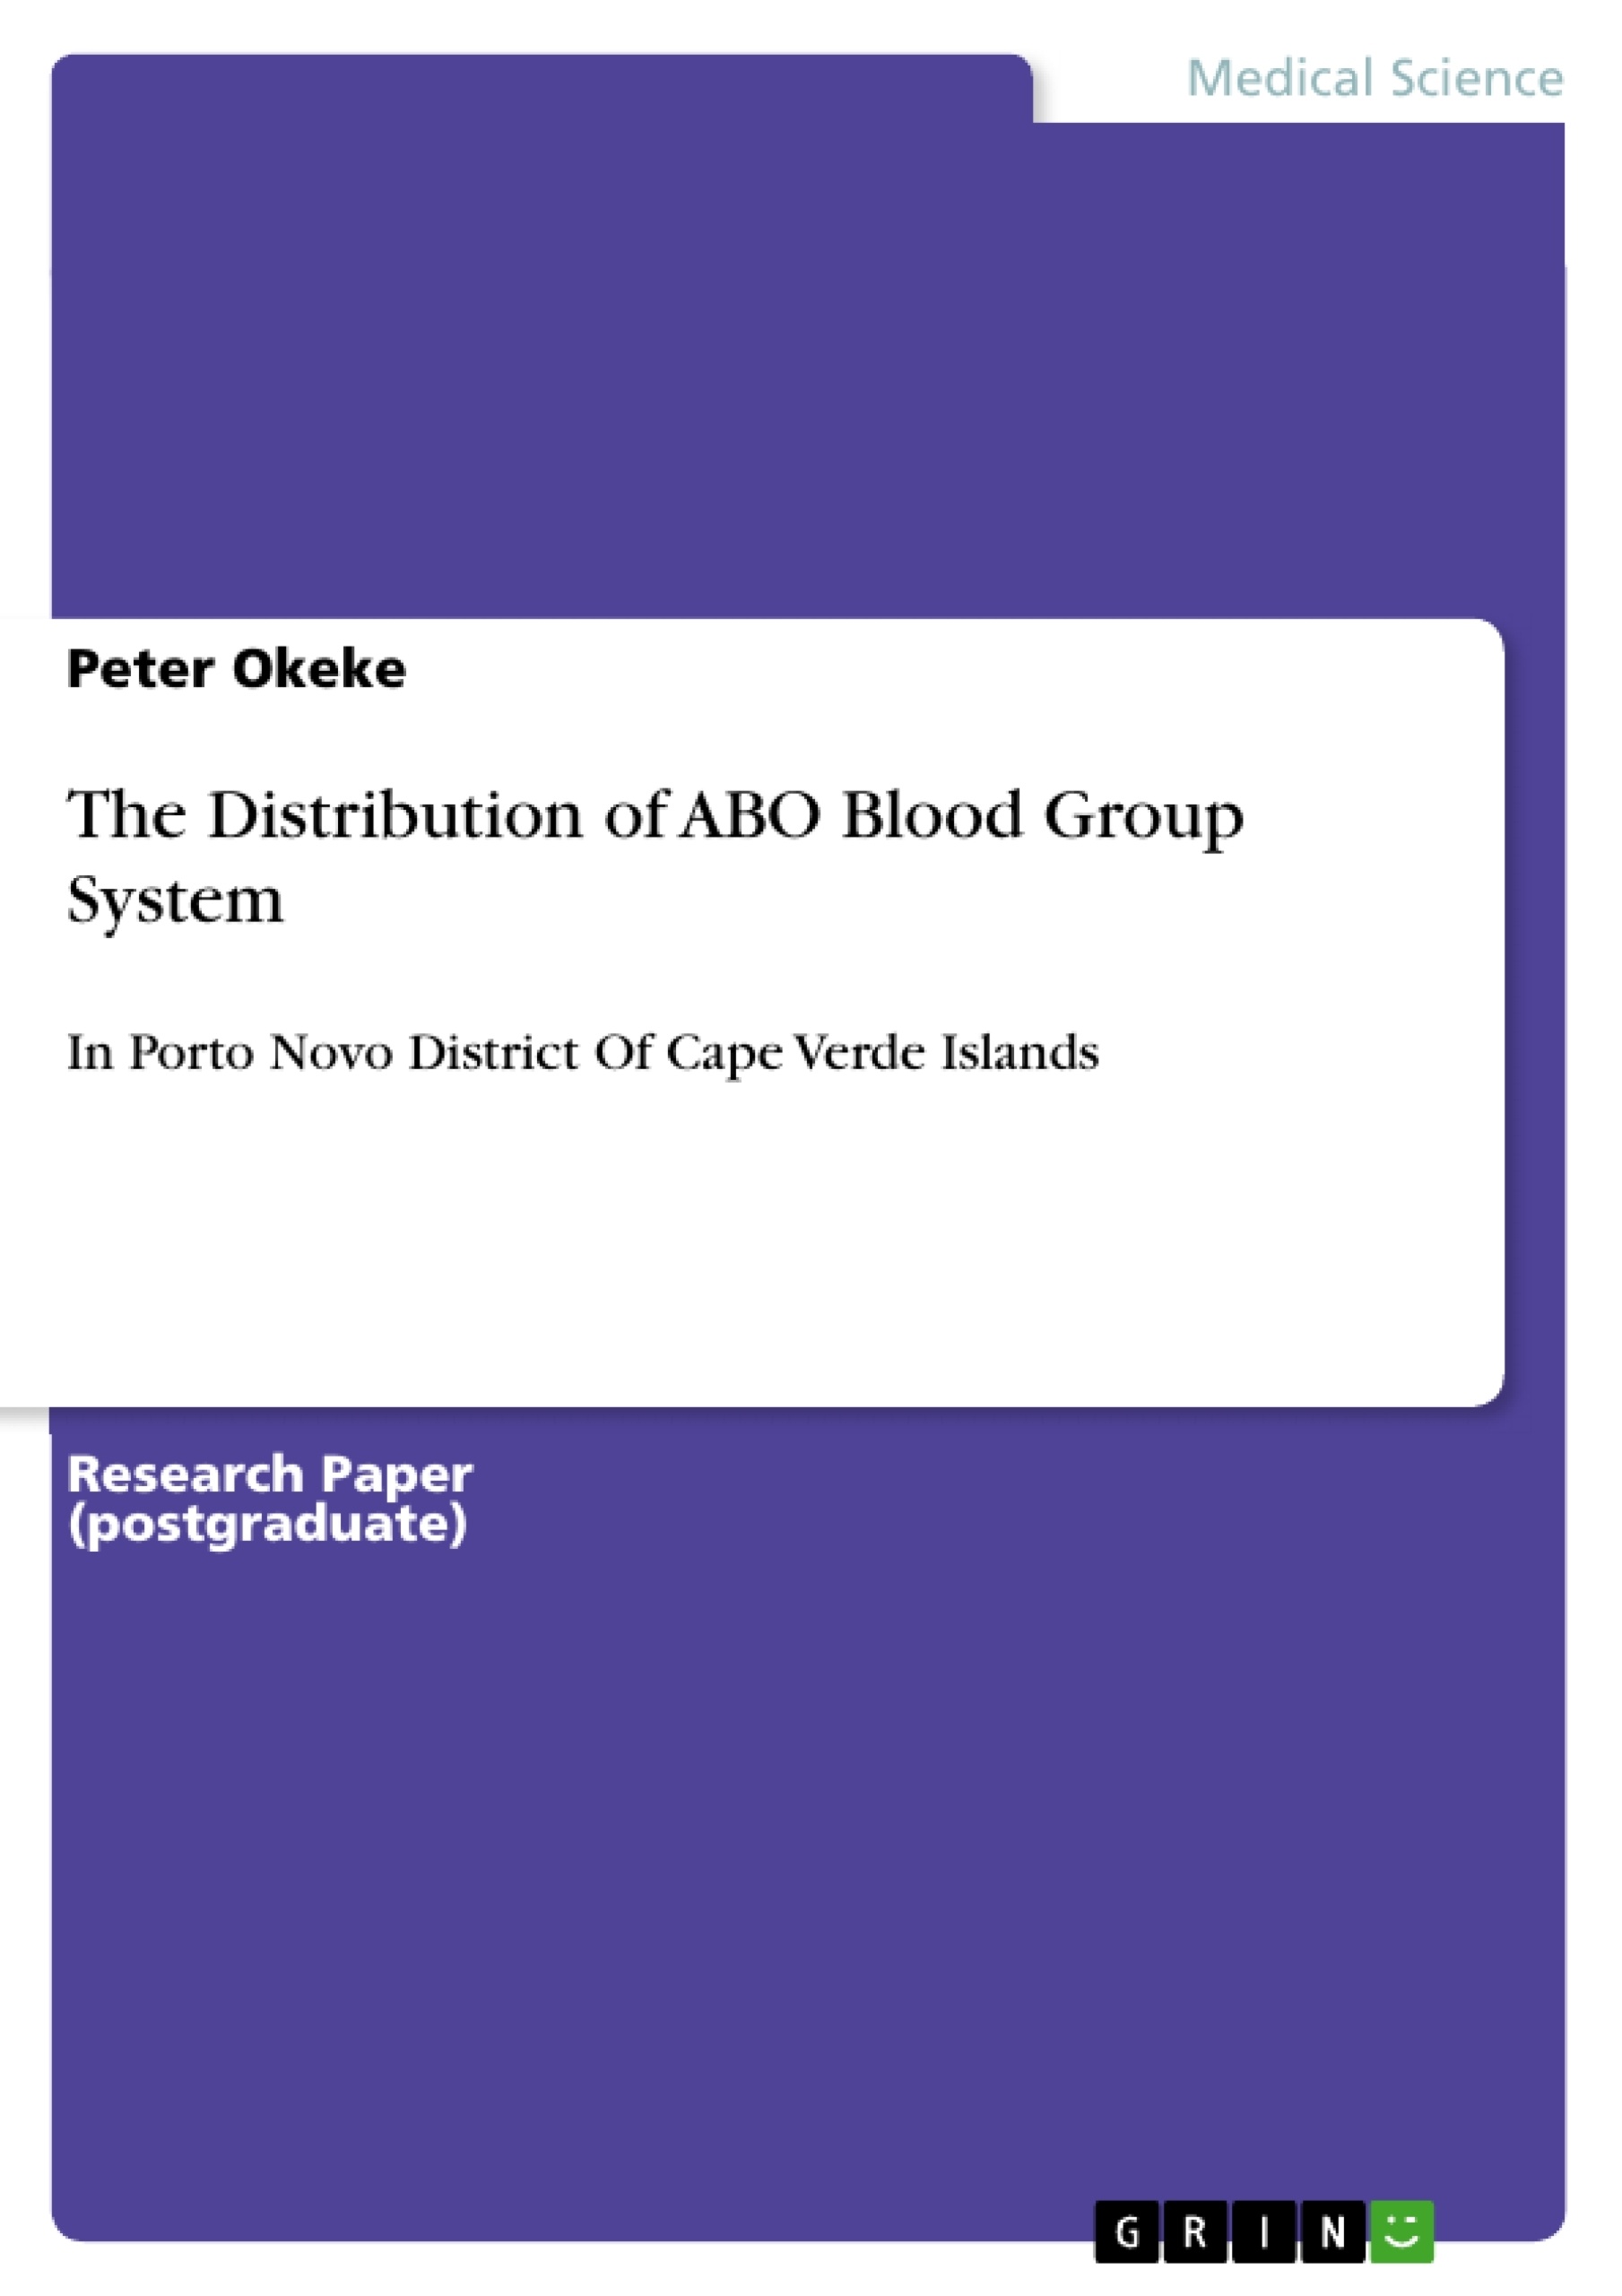 Título: The Distribution of ABO Blood Group System